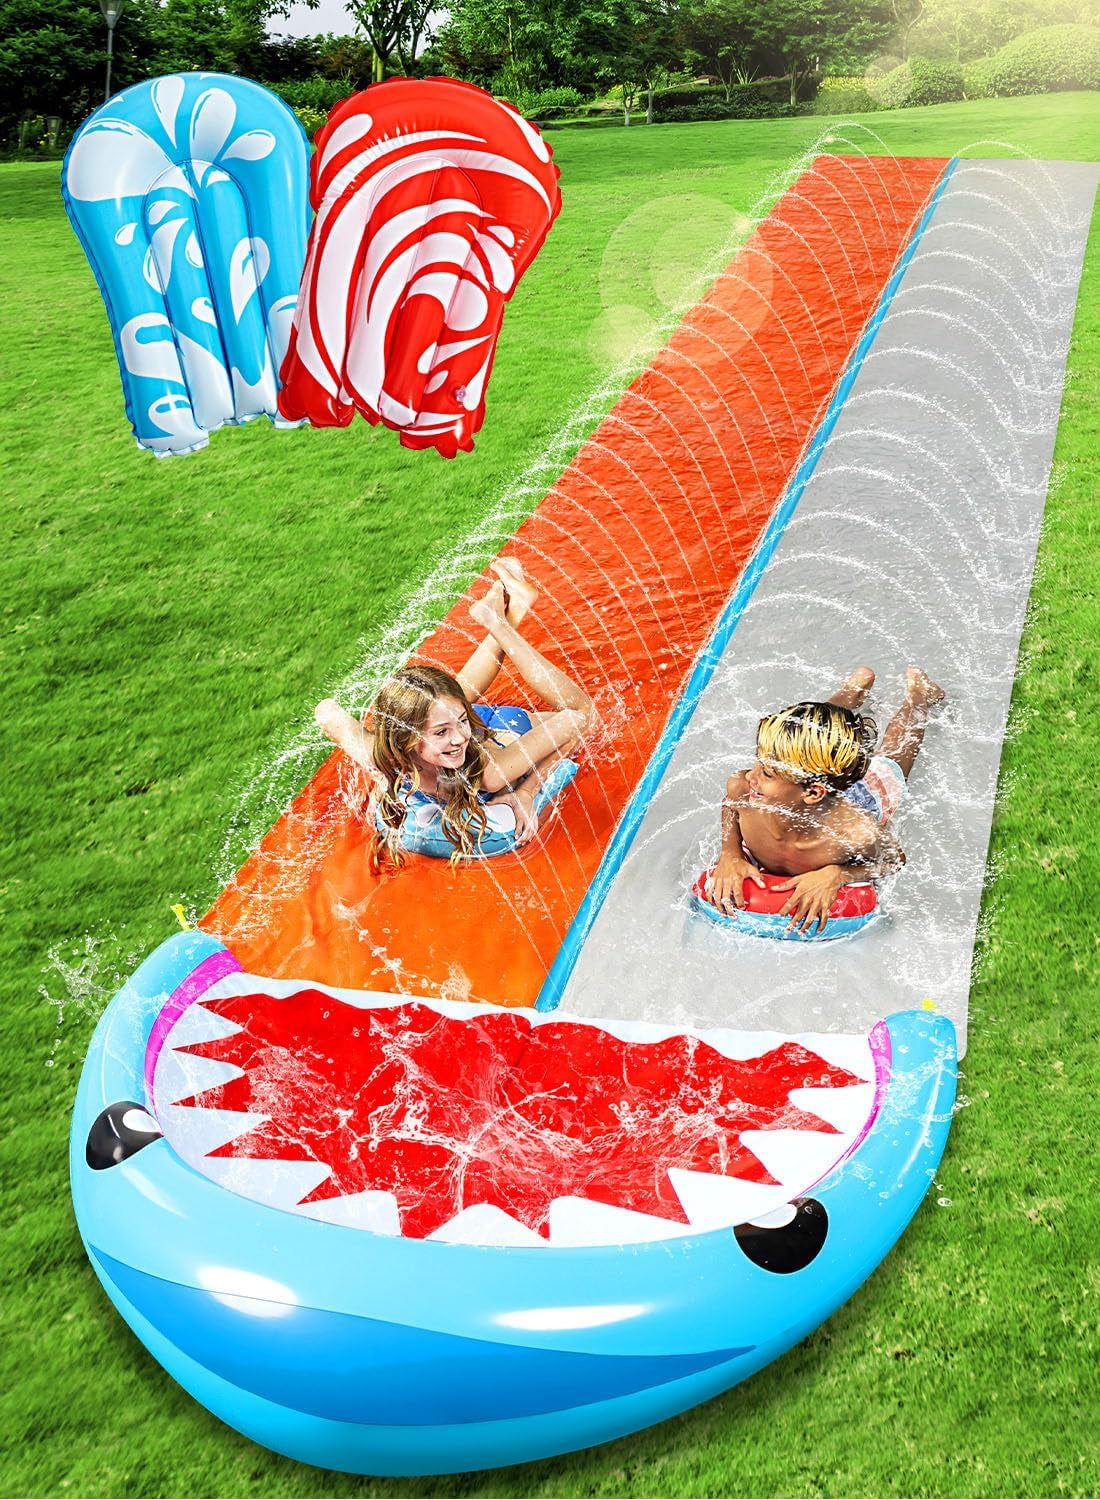 22.5Ft Double Water Slides with 2 Body Boards Backyard Outdoor Slip Lawn Waterslide 2 Sliding Racing Lanes with Sprinklers Summer Water Toy, Orange